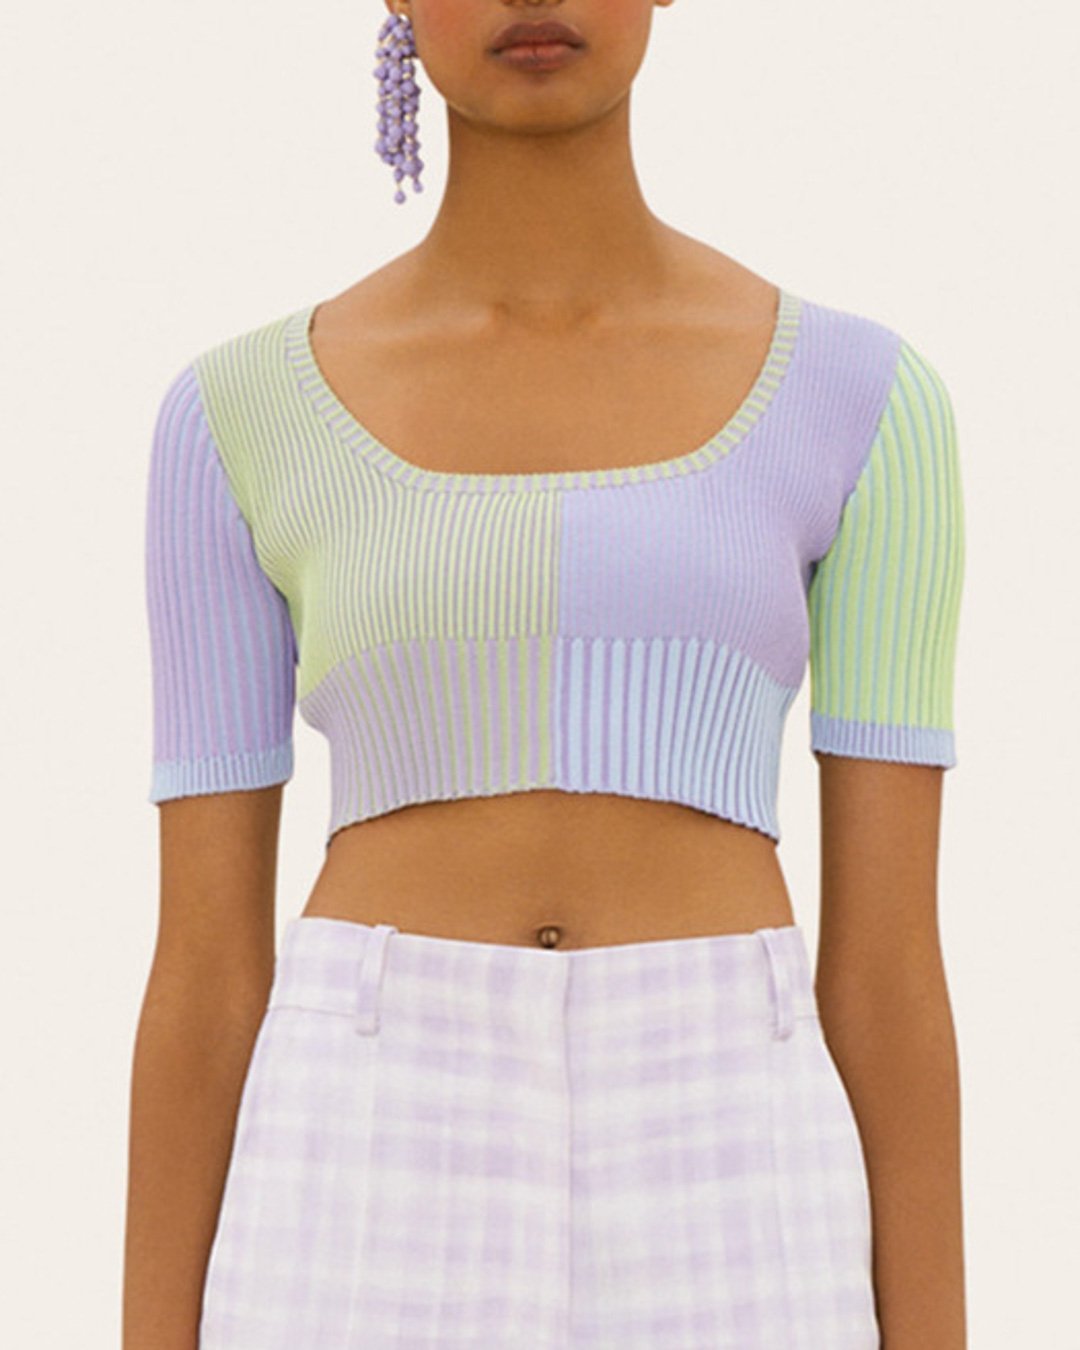 Fashionv- Colorblock Knitted Crop Top